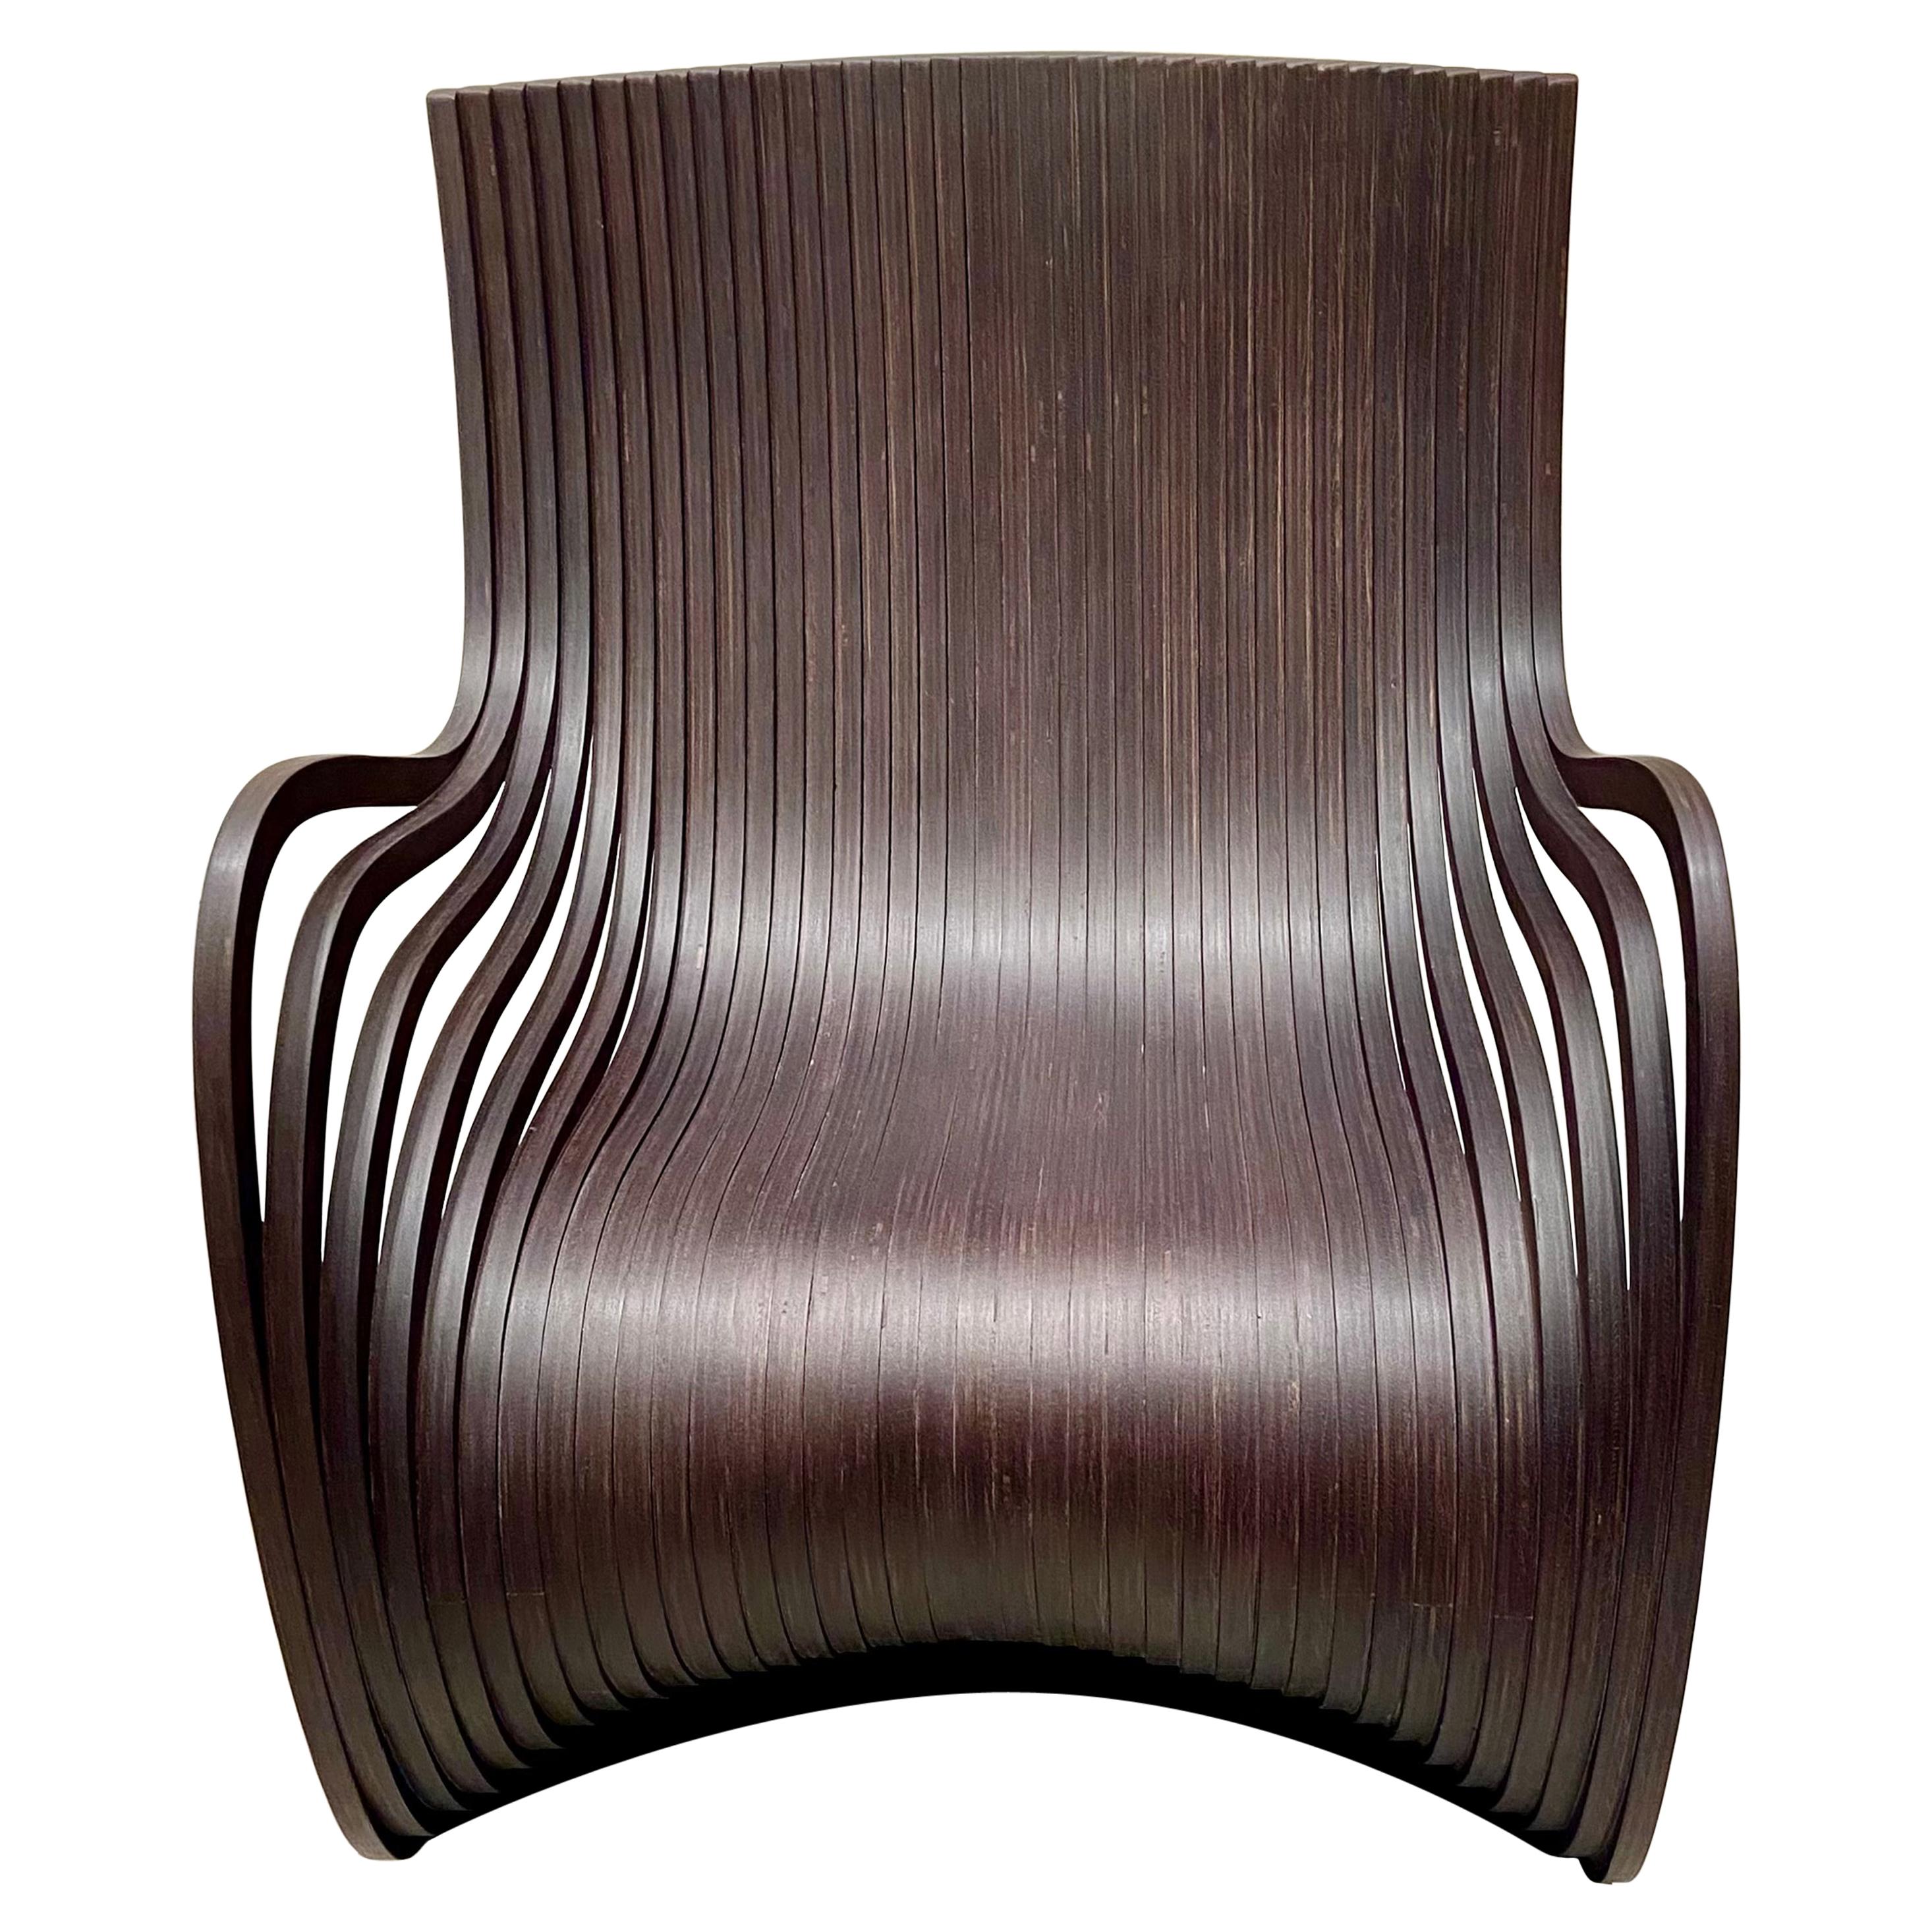 Piegatto Pipo Wenge Wood Lounge Chair